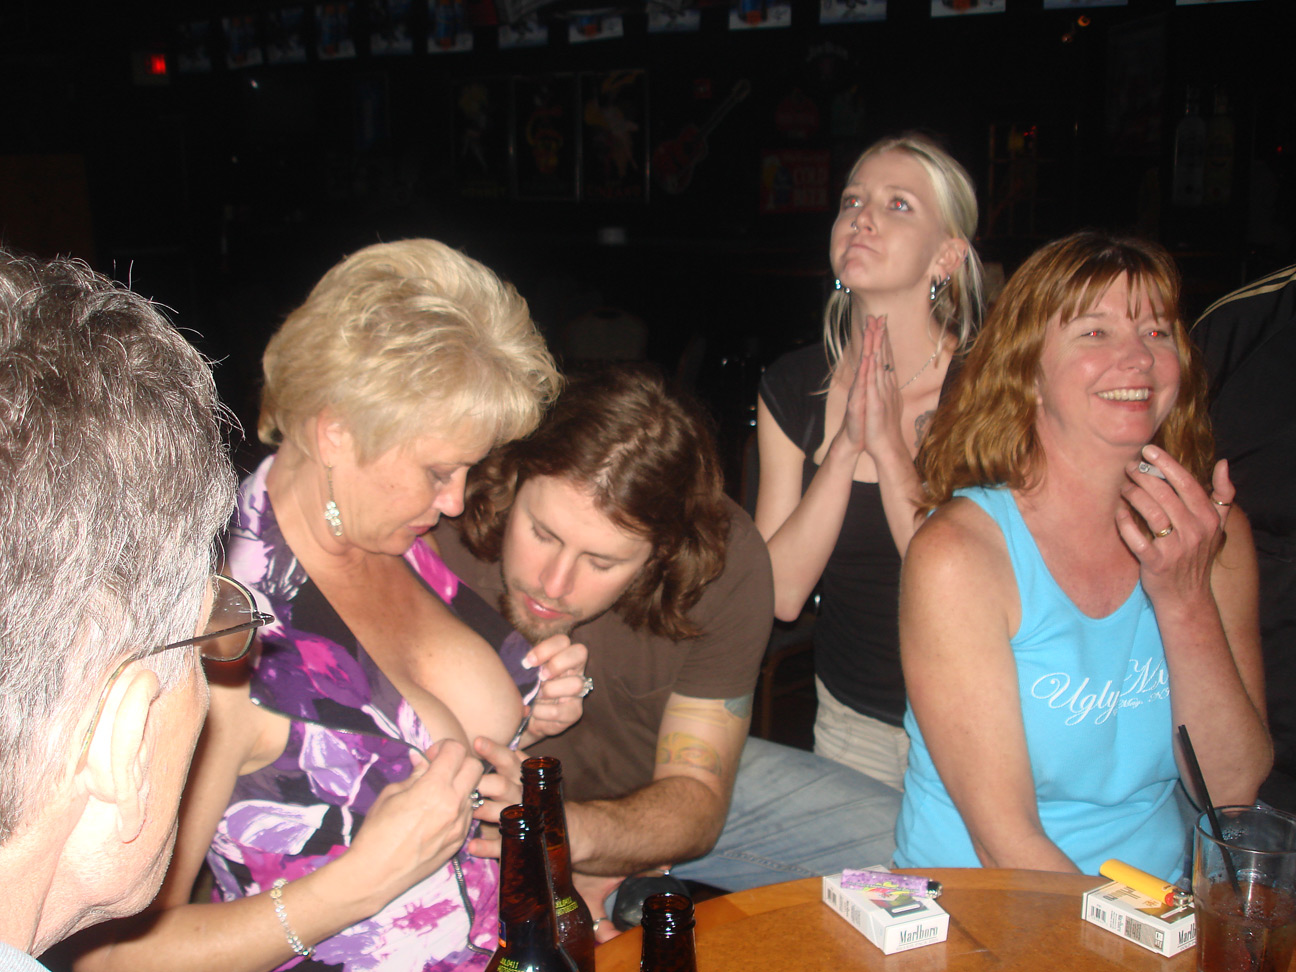 Our Real Tampa Swingers Monthly Bar Meet And Greet pic image